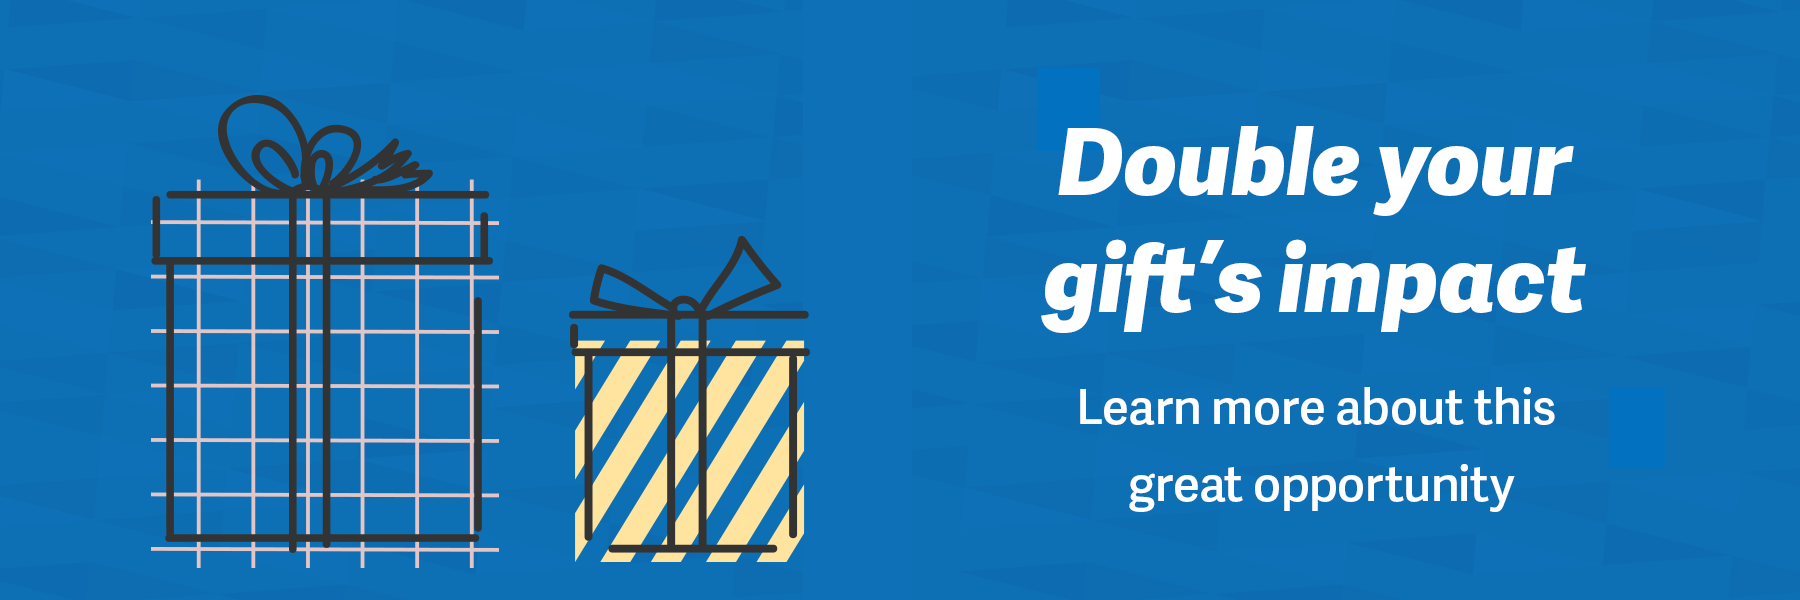 Double your gift's impact with matching gift opportunities.